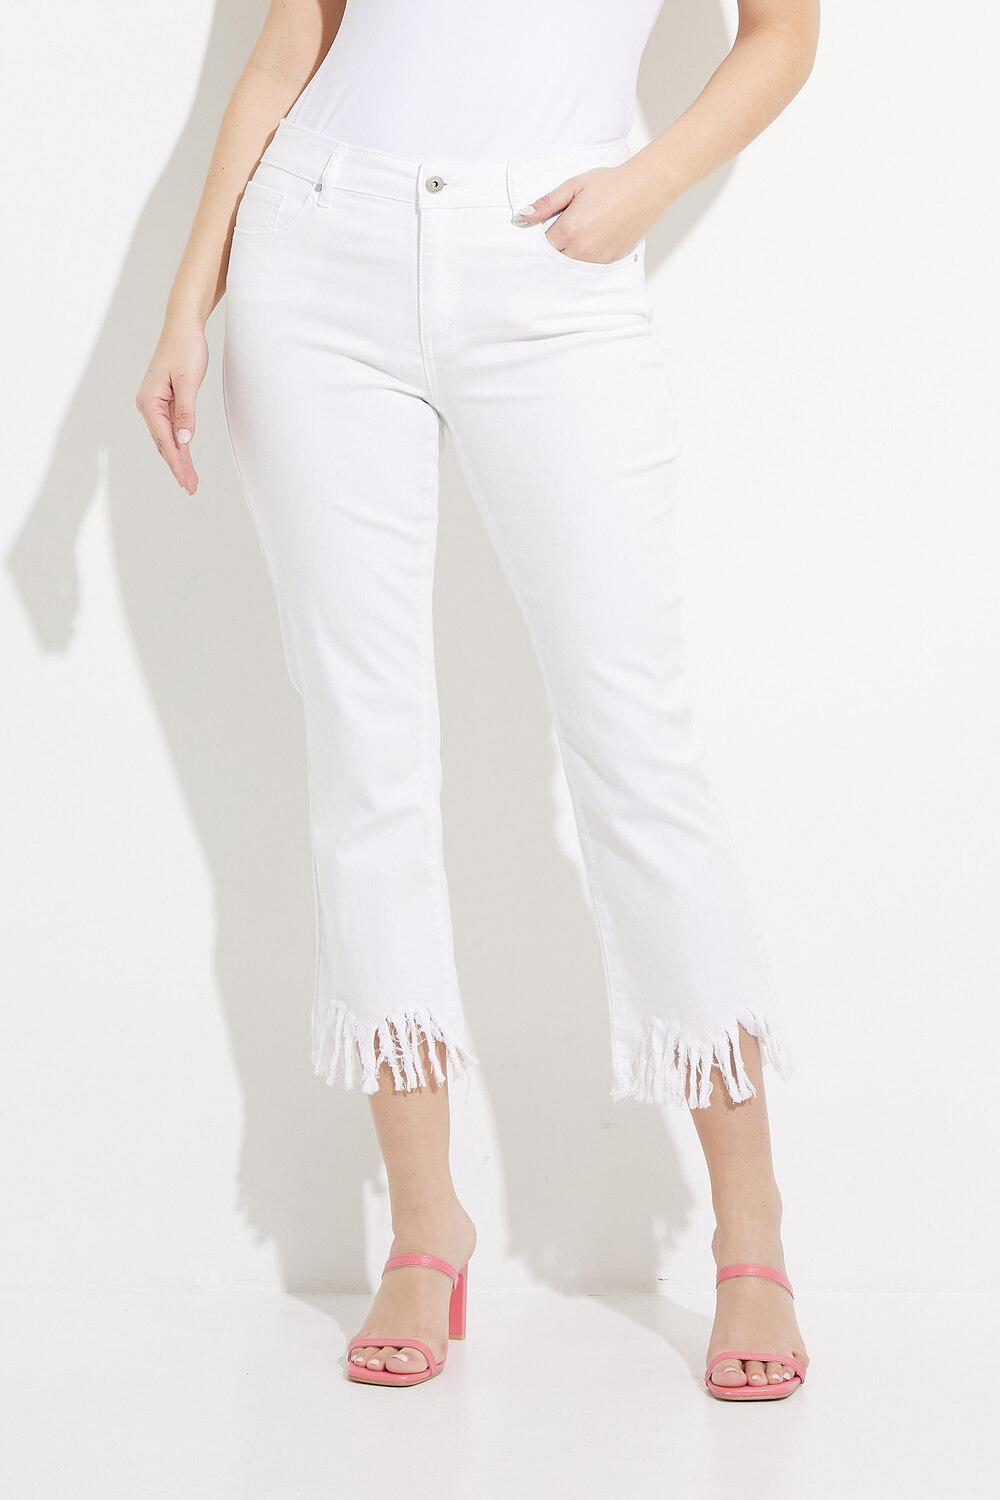 Feathered Hem Twill Jeans Style C5277RR. White